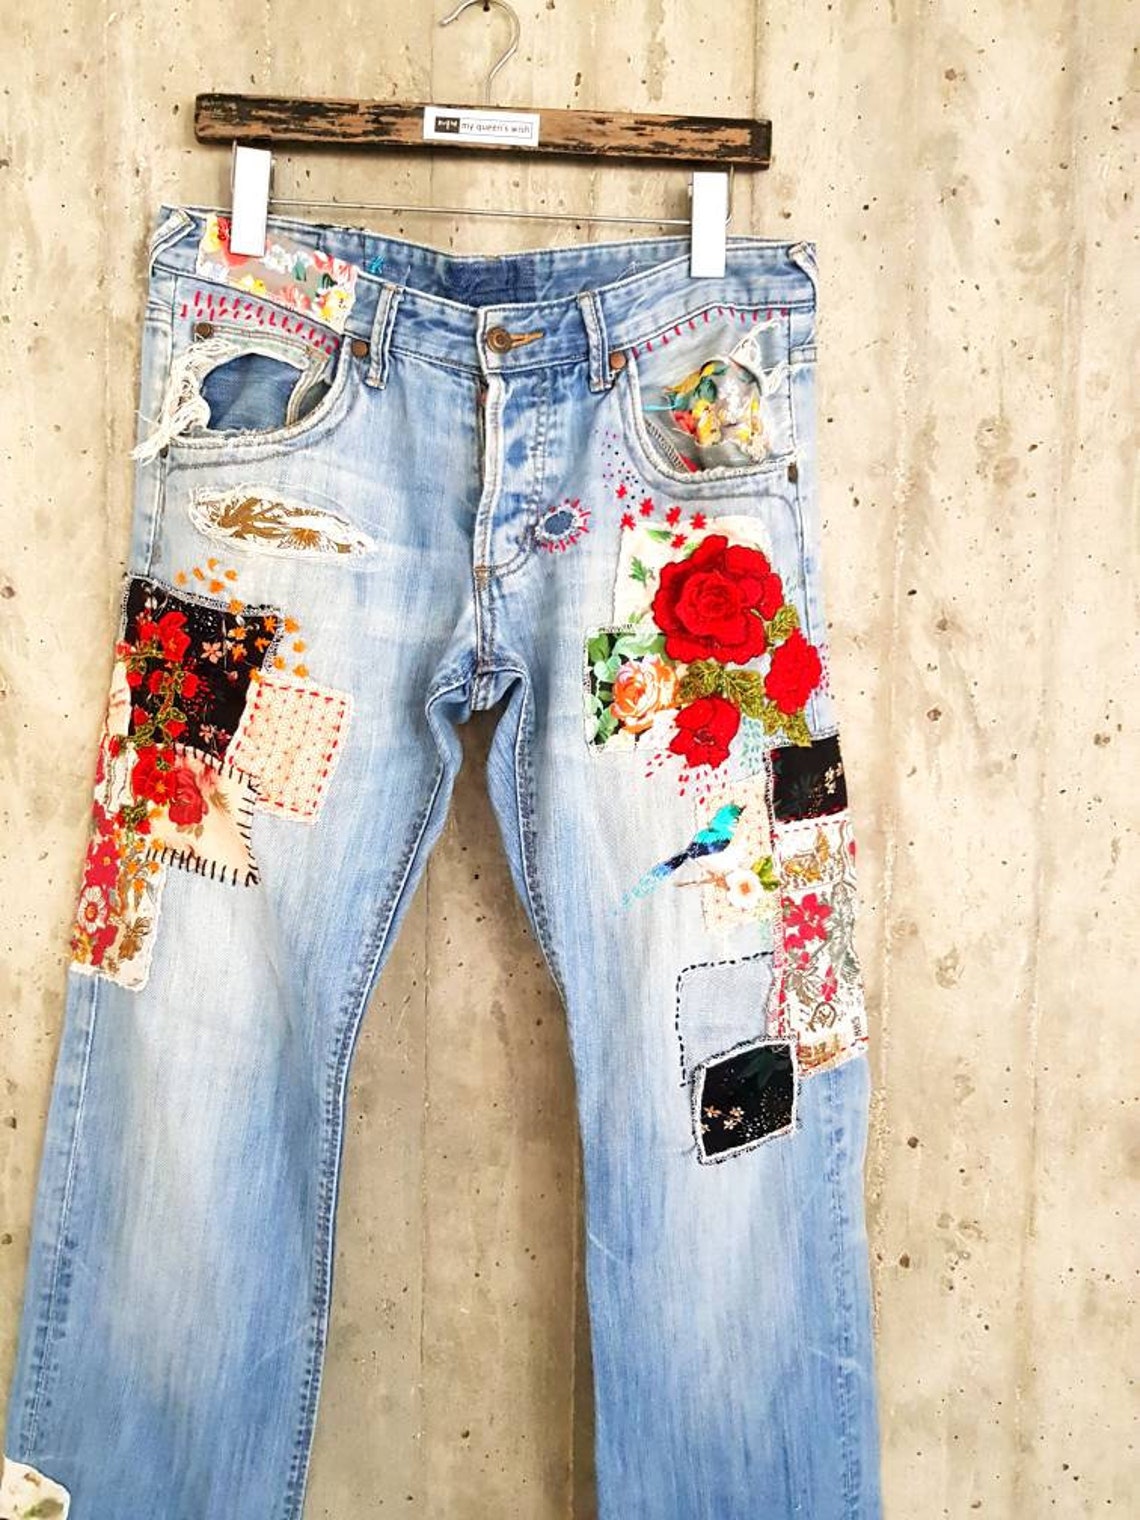 Patched Denim / Patched Jeans / Reworked Vintage Jeans With | Etsy